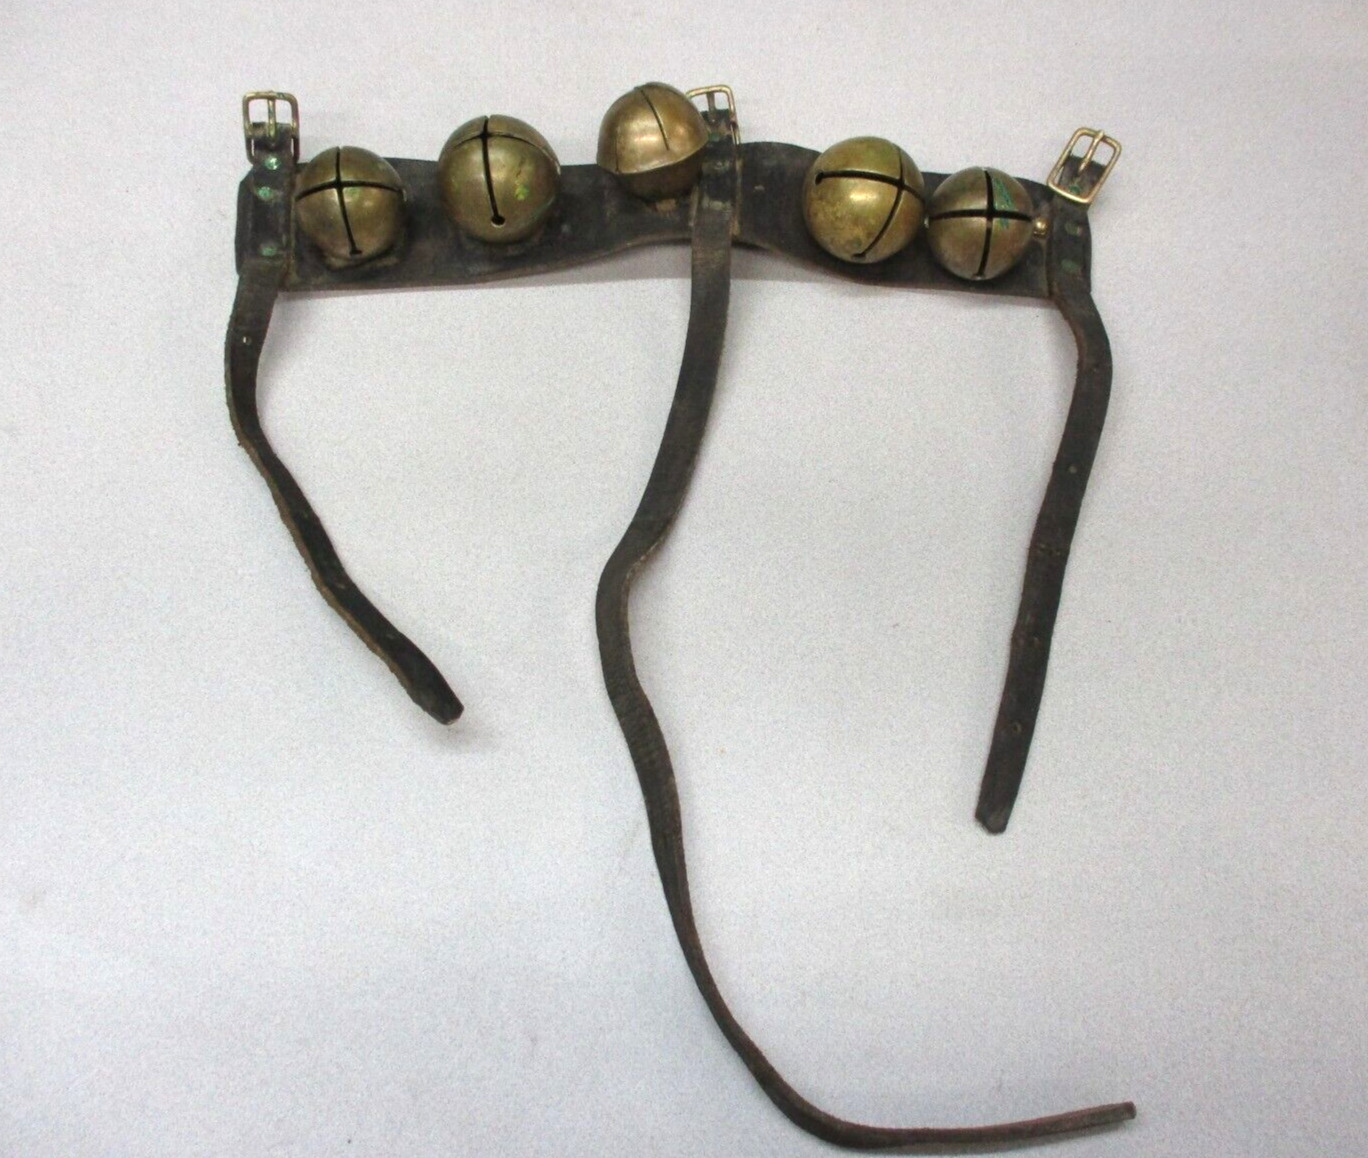 Antique Sleigh Bells/Jingle Bells on Leather Strap. Set of 5, Brass. Horse Tack.